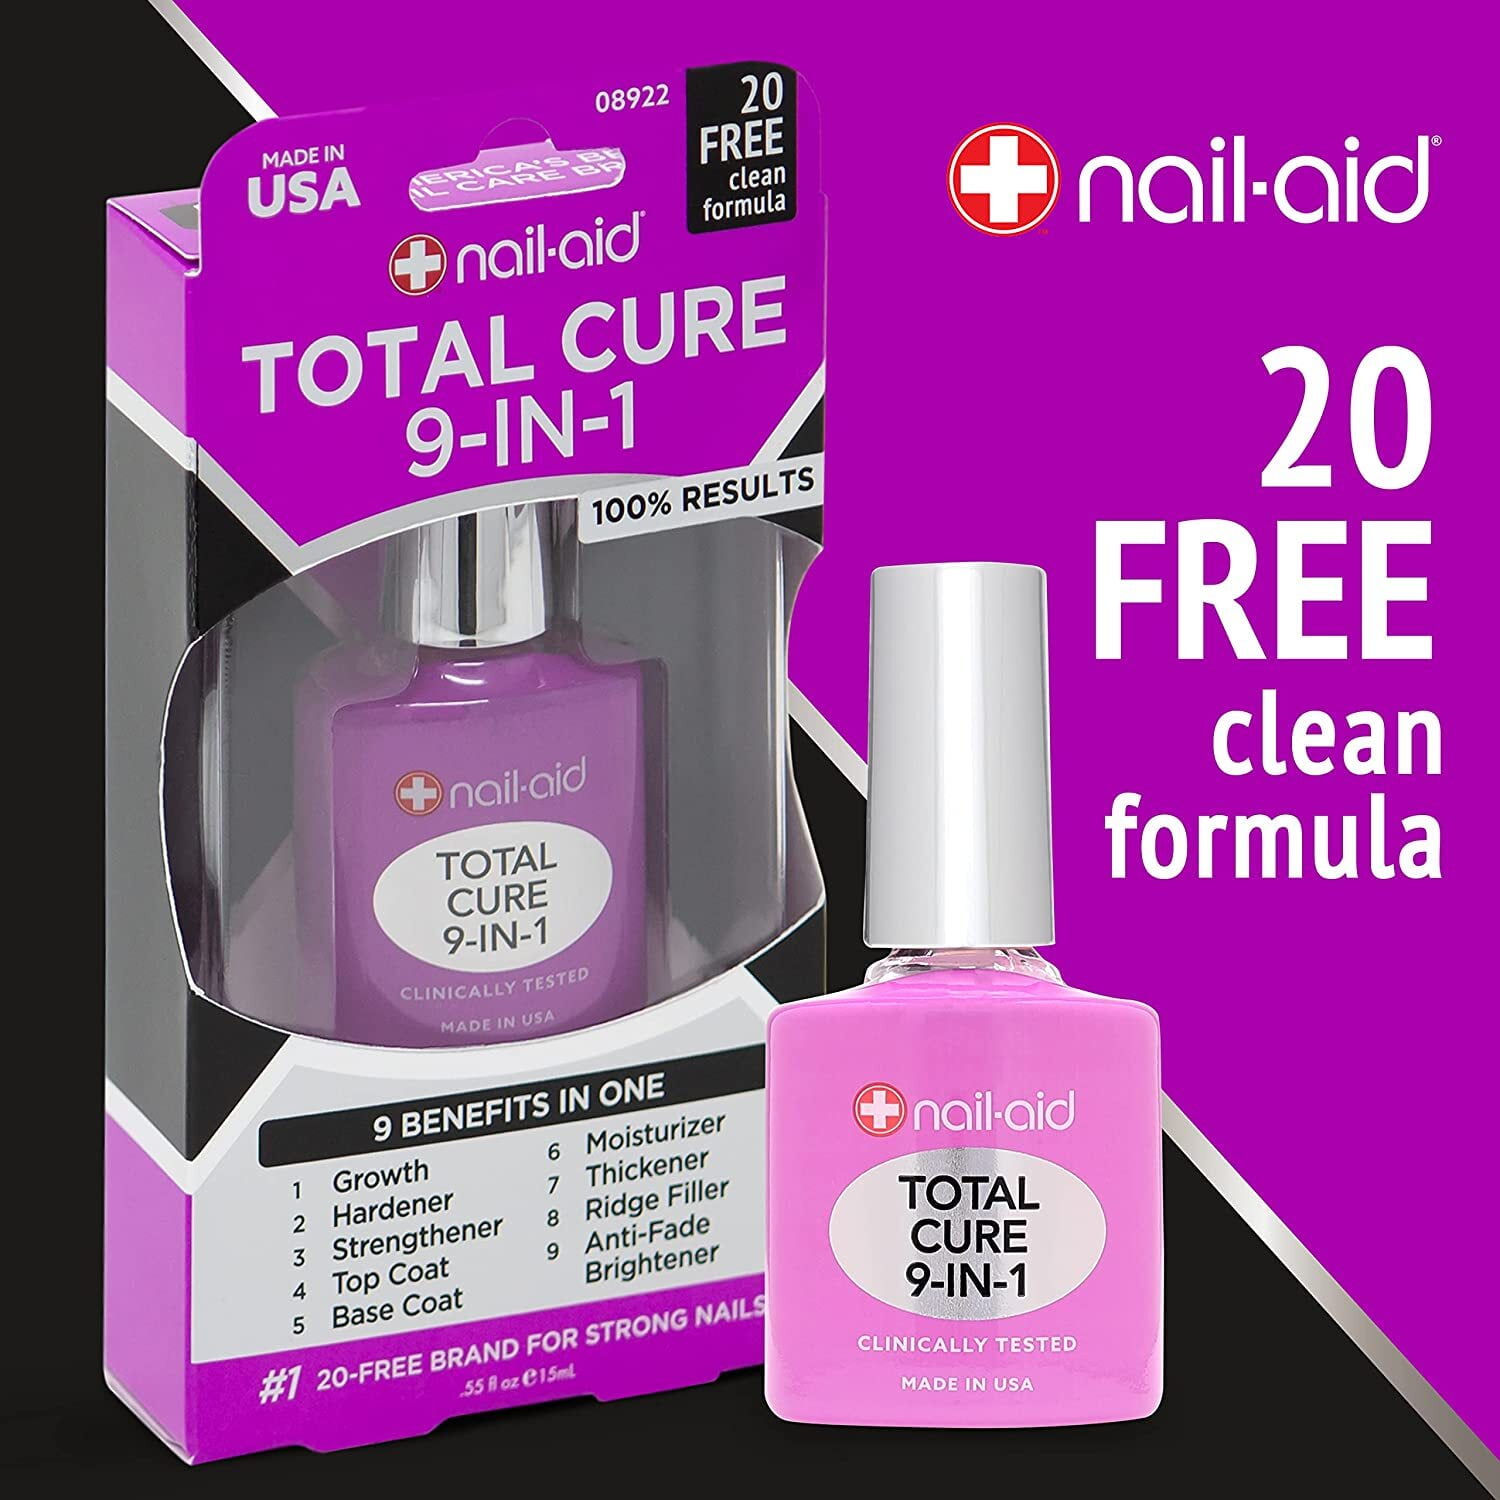 Nail-Aid Total Cure 9-in-1 